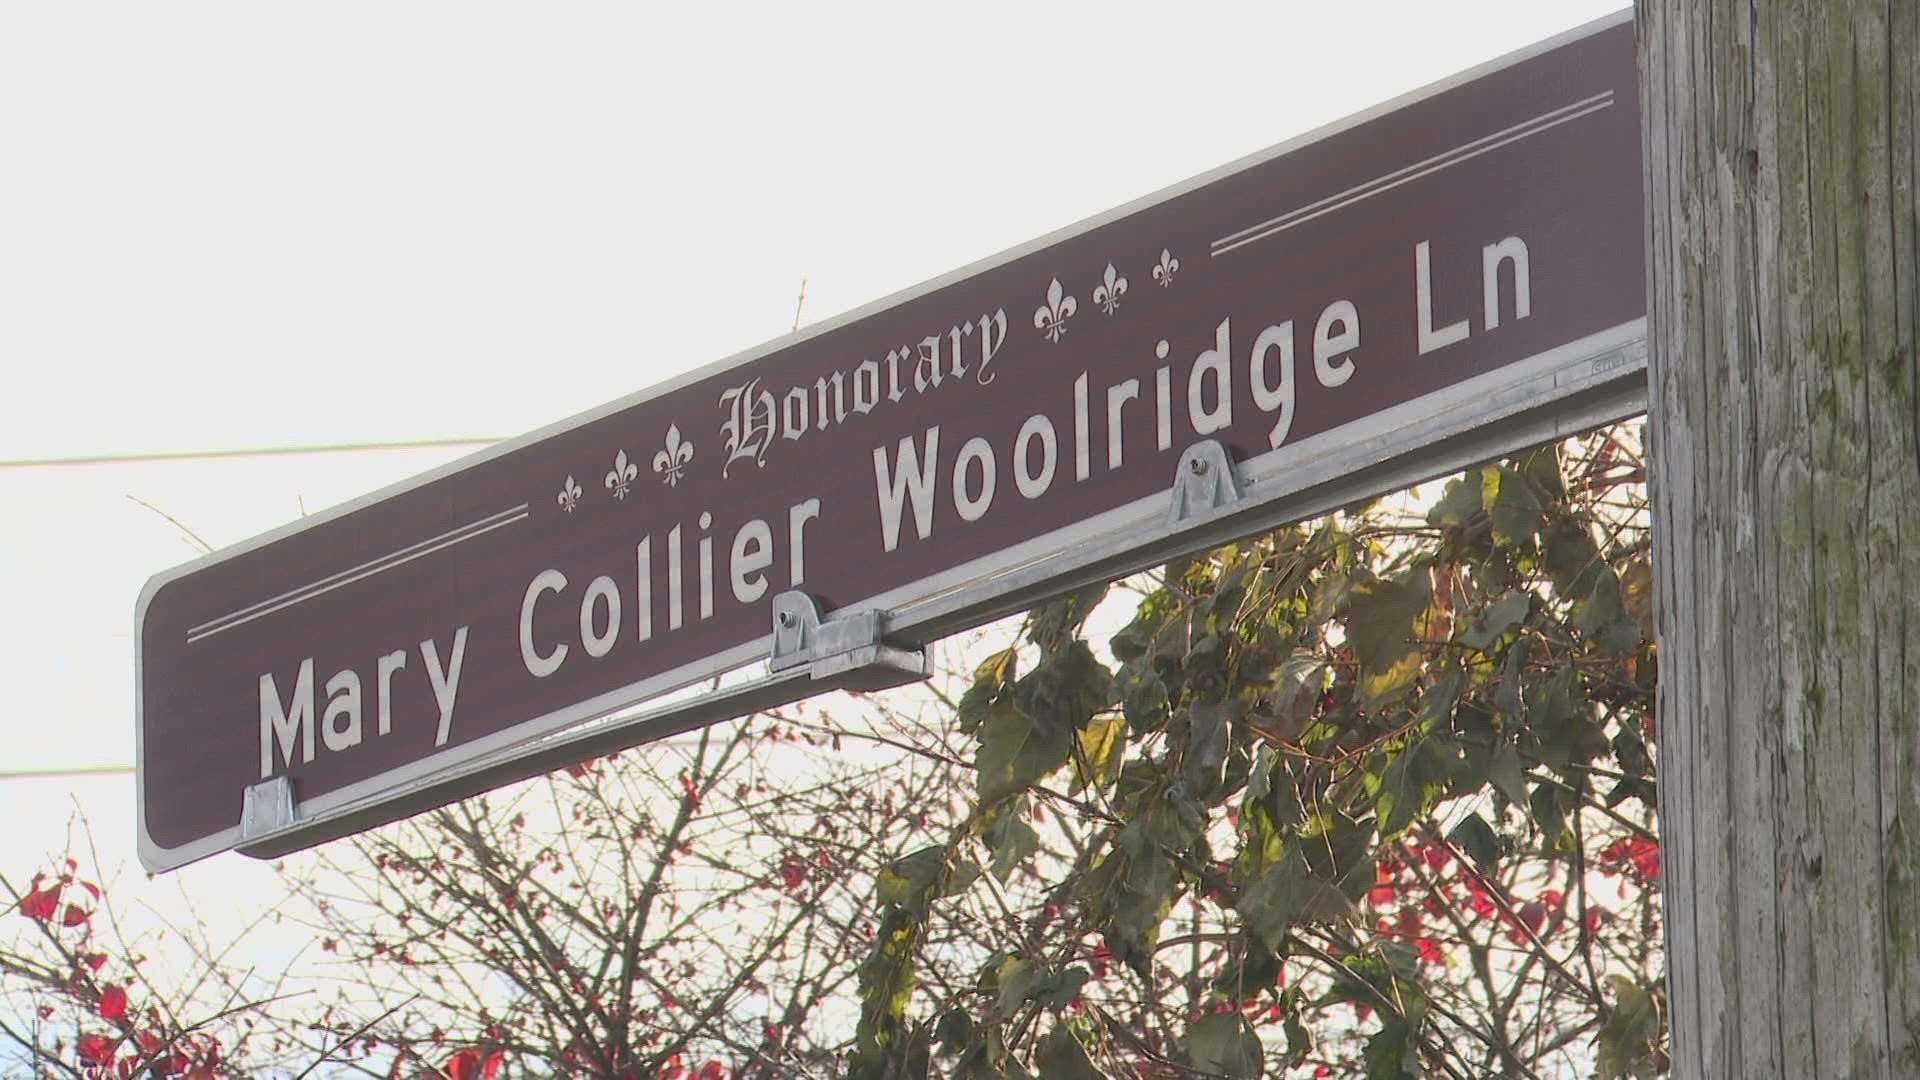 Former Louisville councilwoman receives honorary street sign